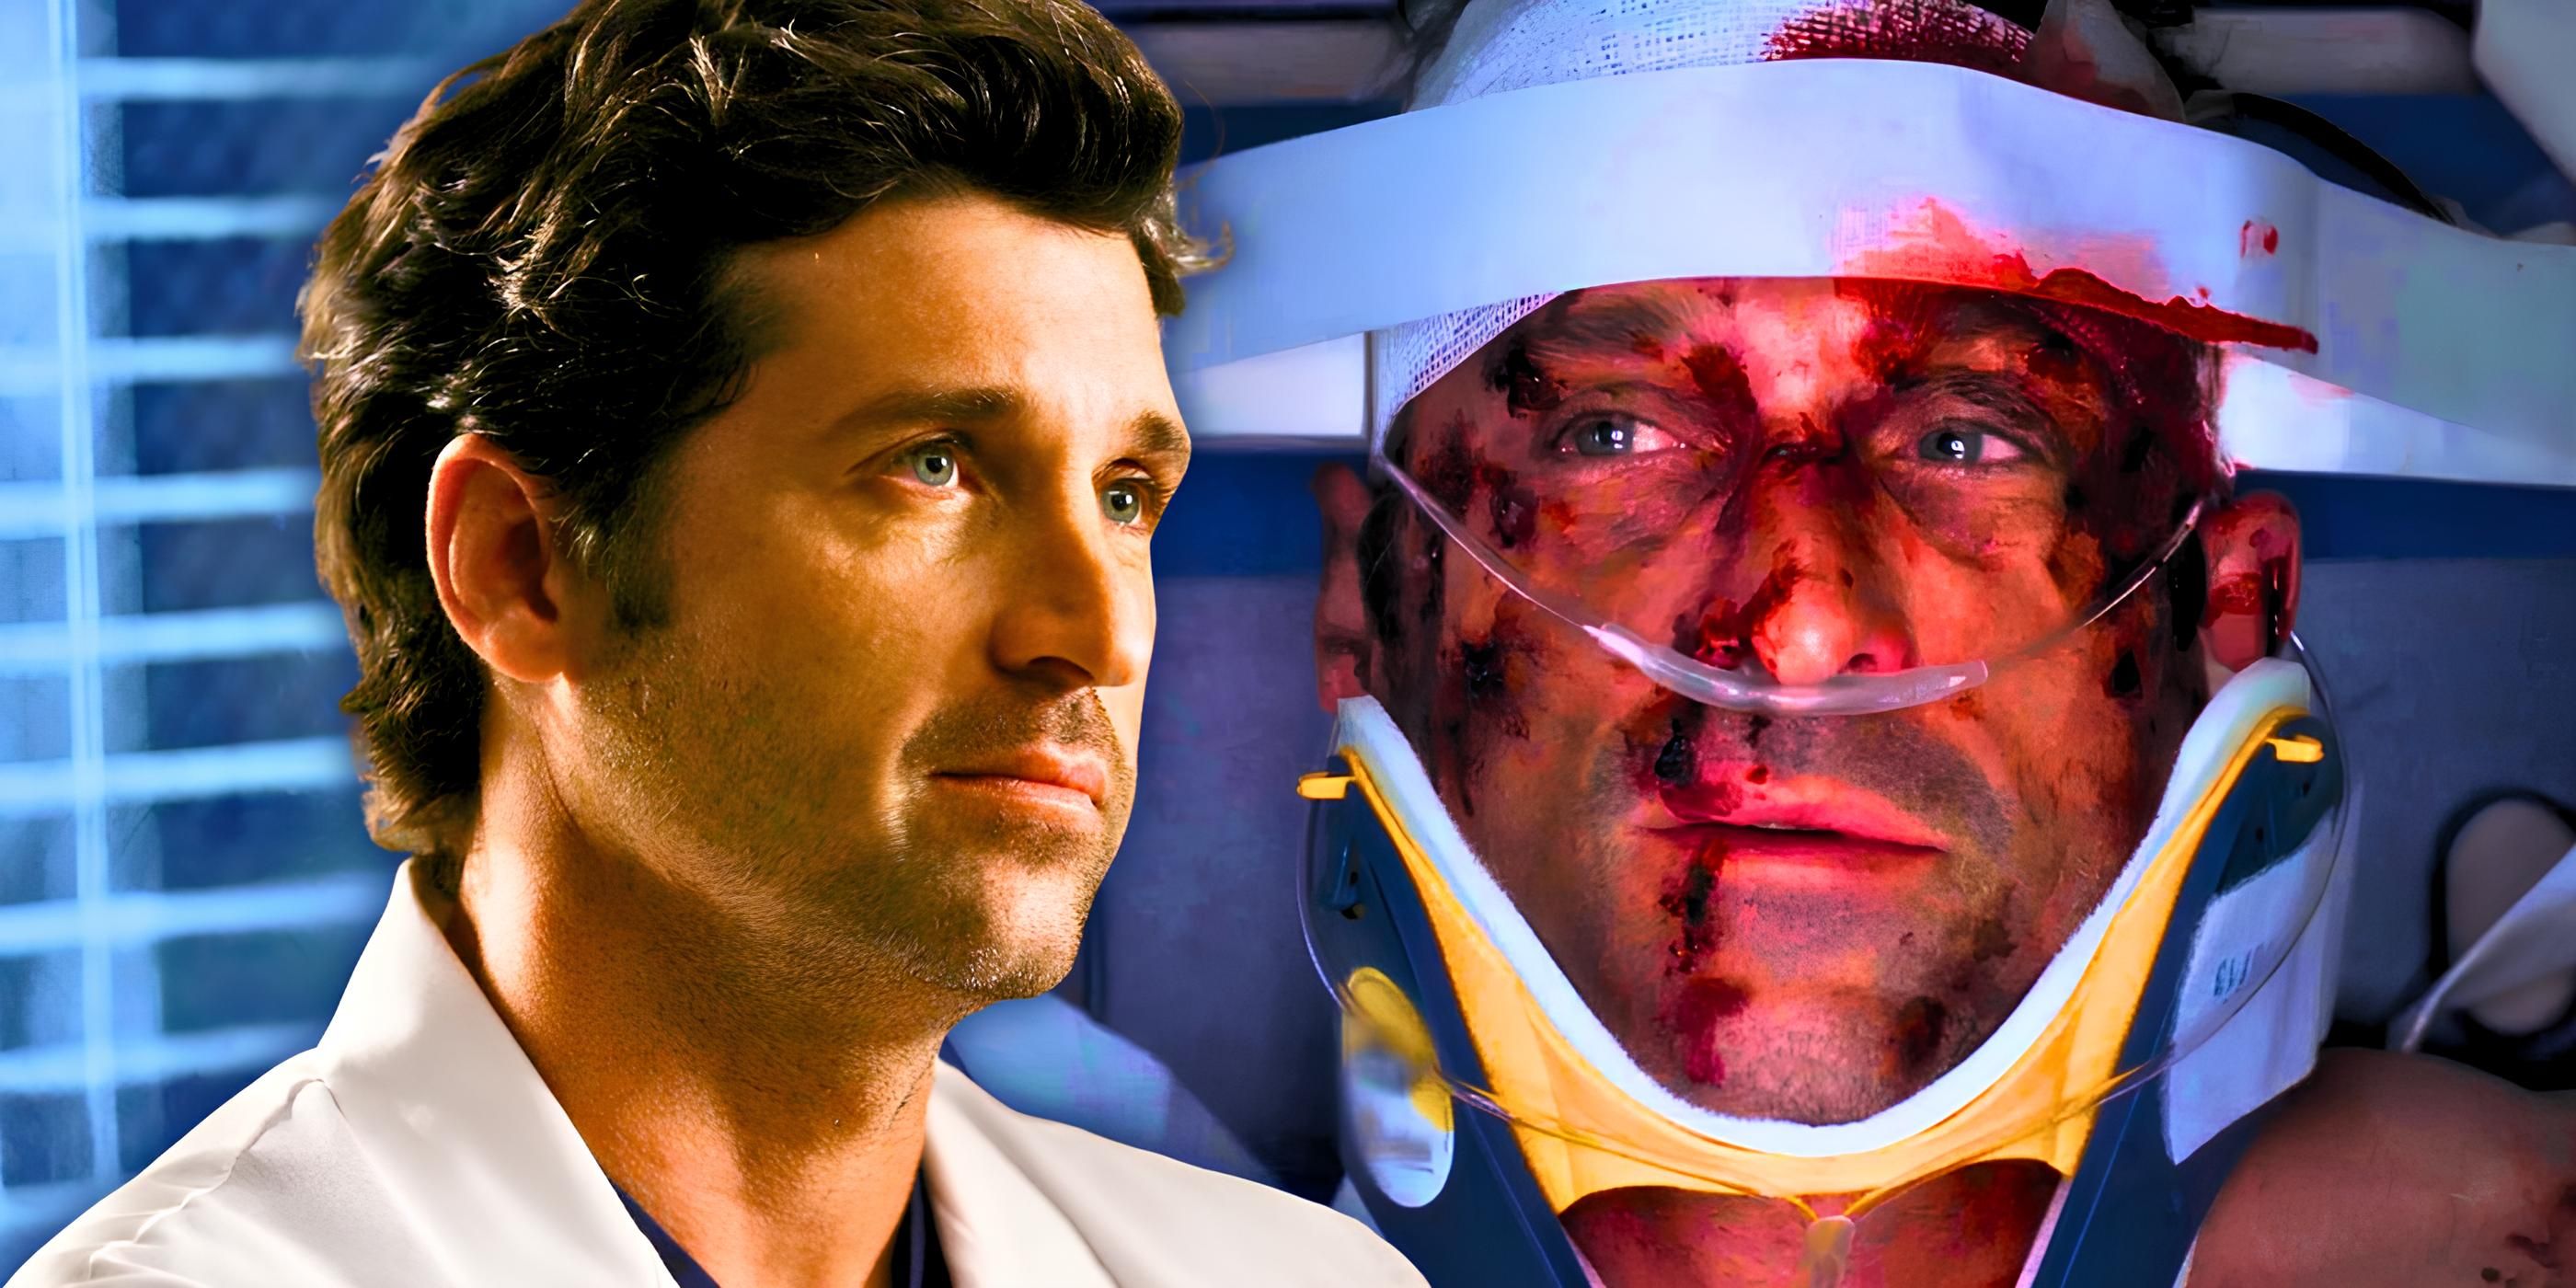 Sorry, but I firmly believe that Derek Shepherd’s death on Grey’s Anatomy saved the series